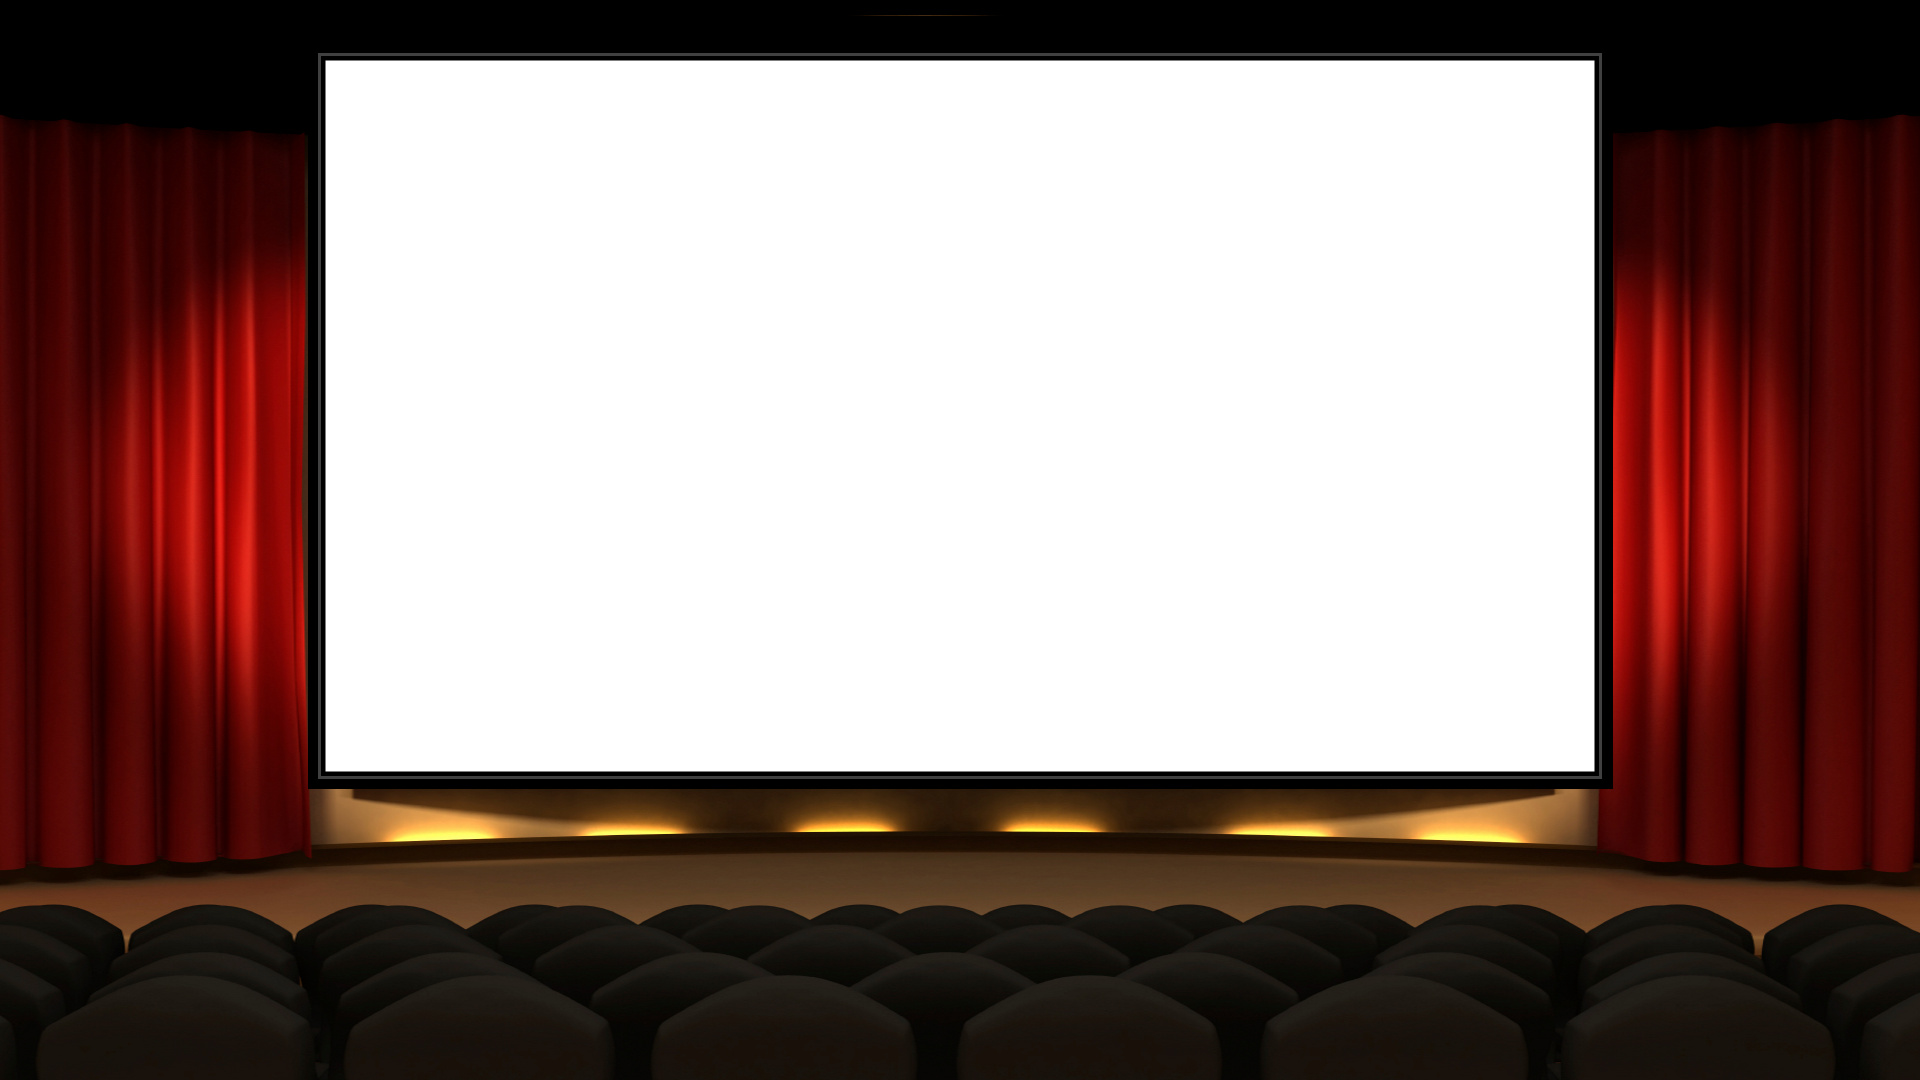 Cinema screen, Movie projection, Theater ambiance, Cinematic immersion, 1920x1080 Full HD Desktop